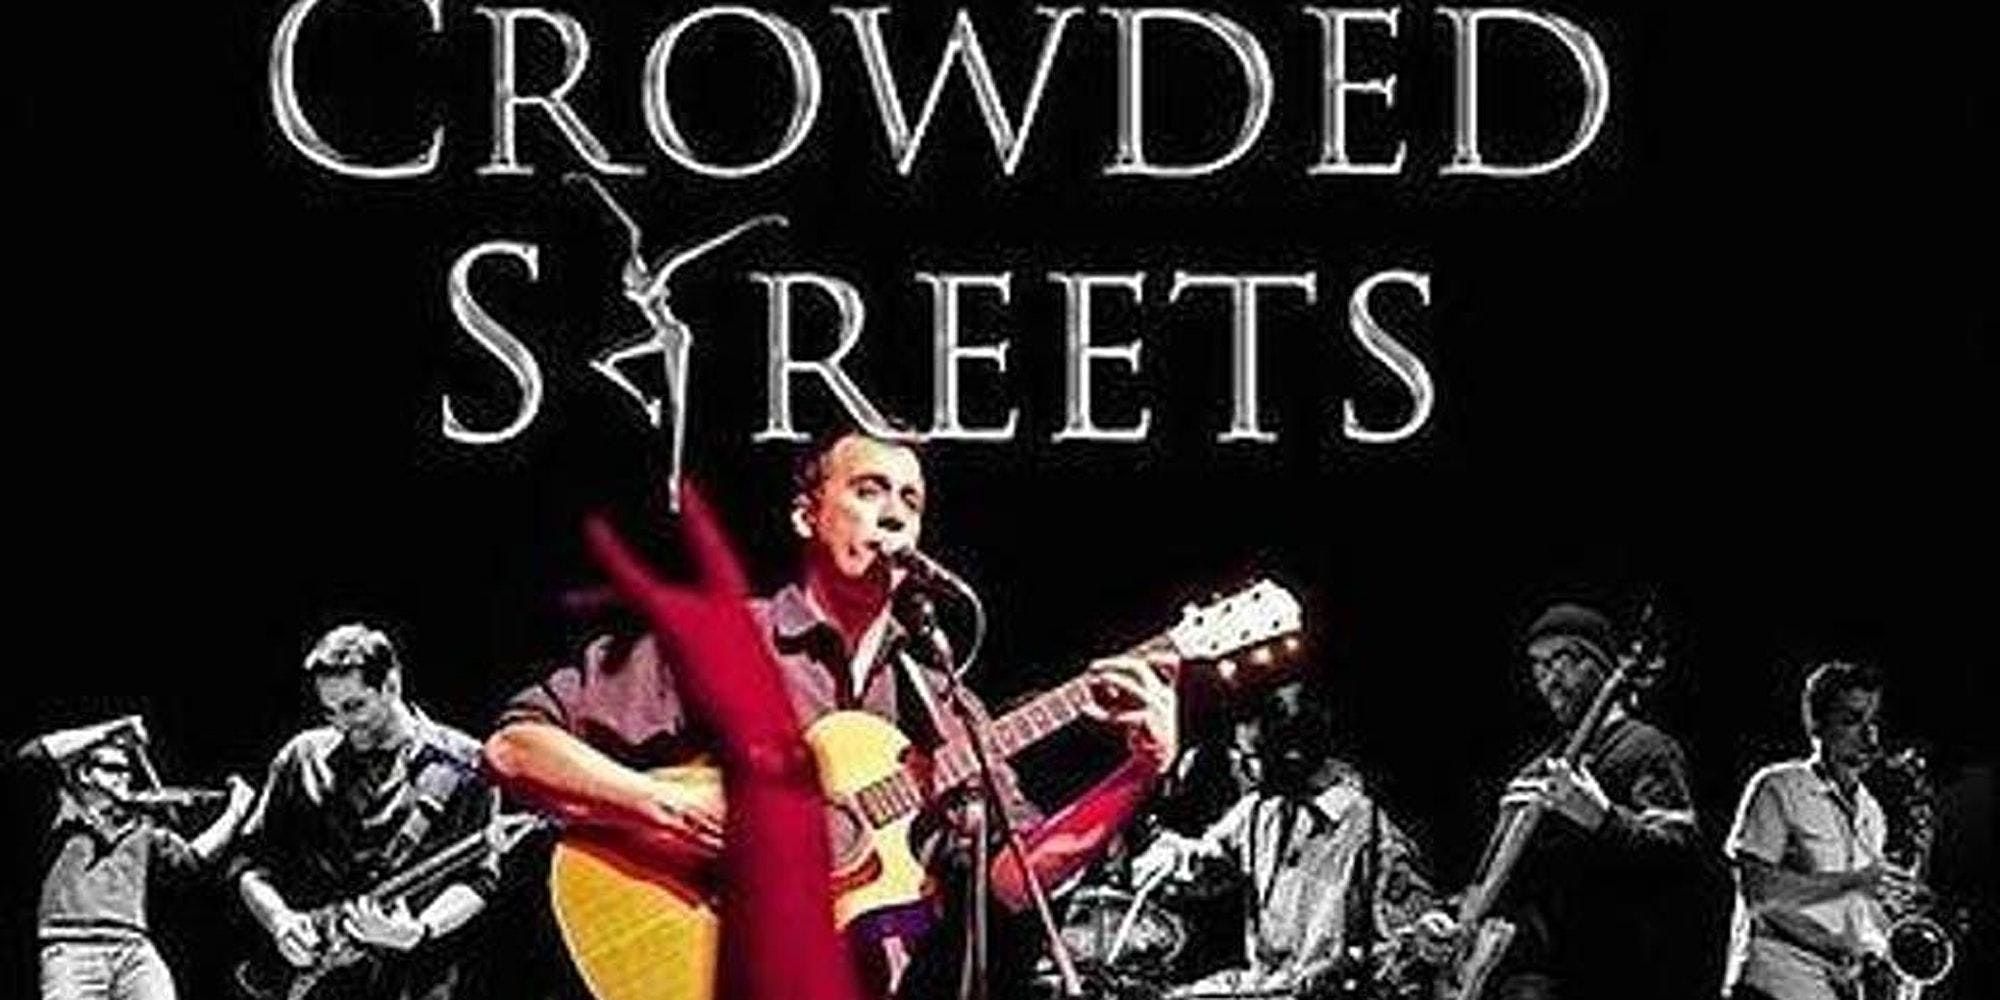 Crowded Streets: The Dave Matthews Band Experience at Elevation 27 promotional image